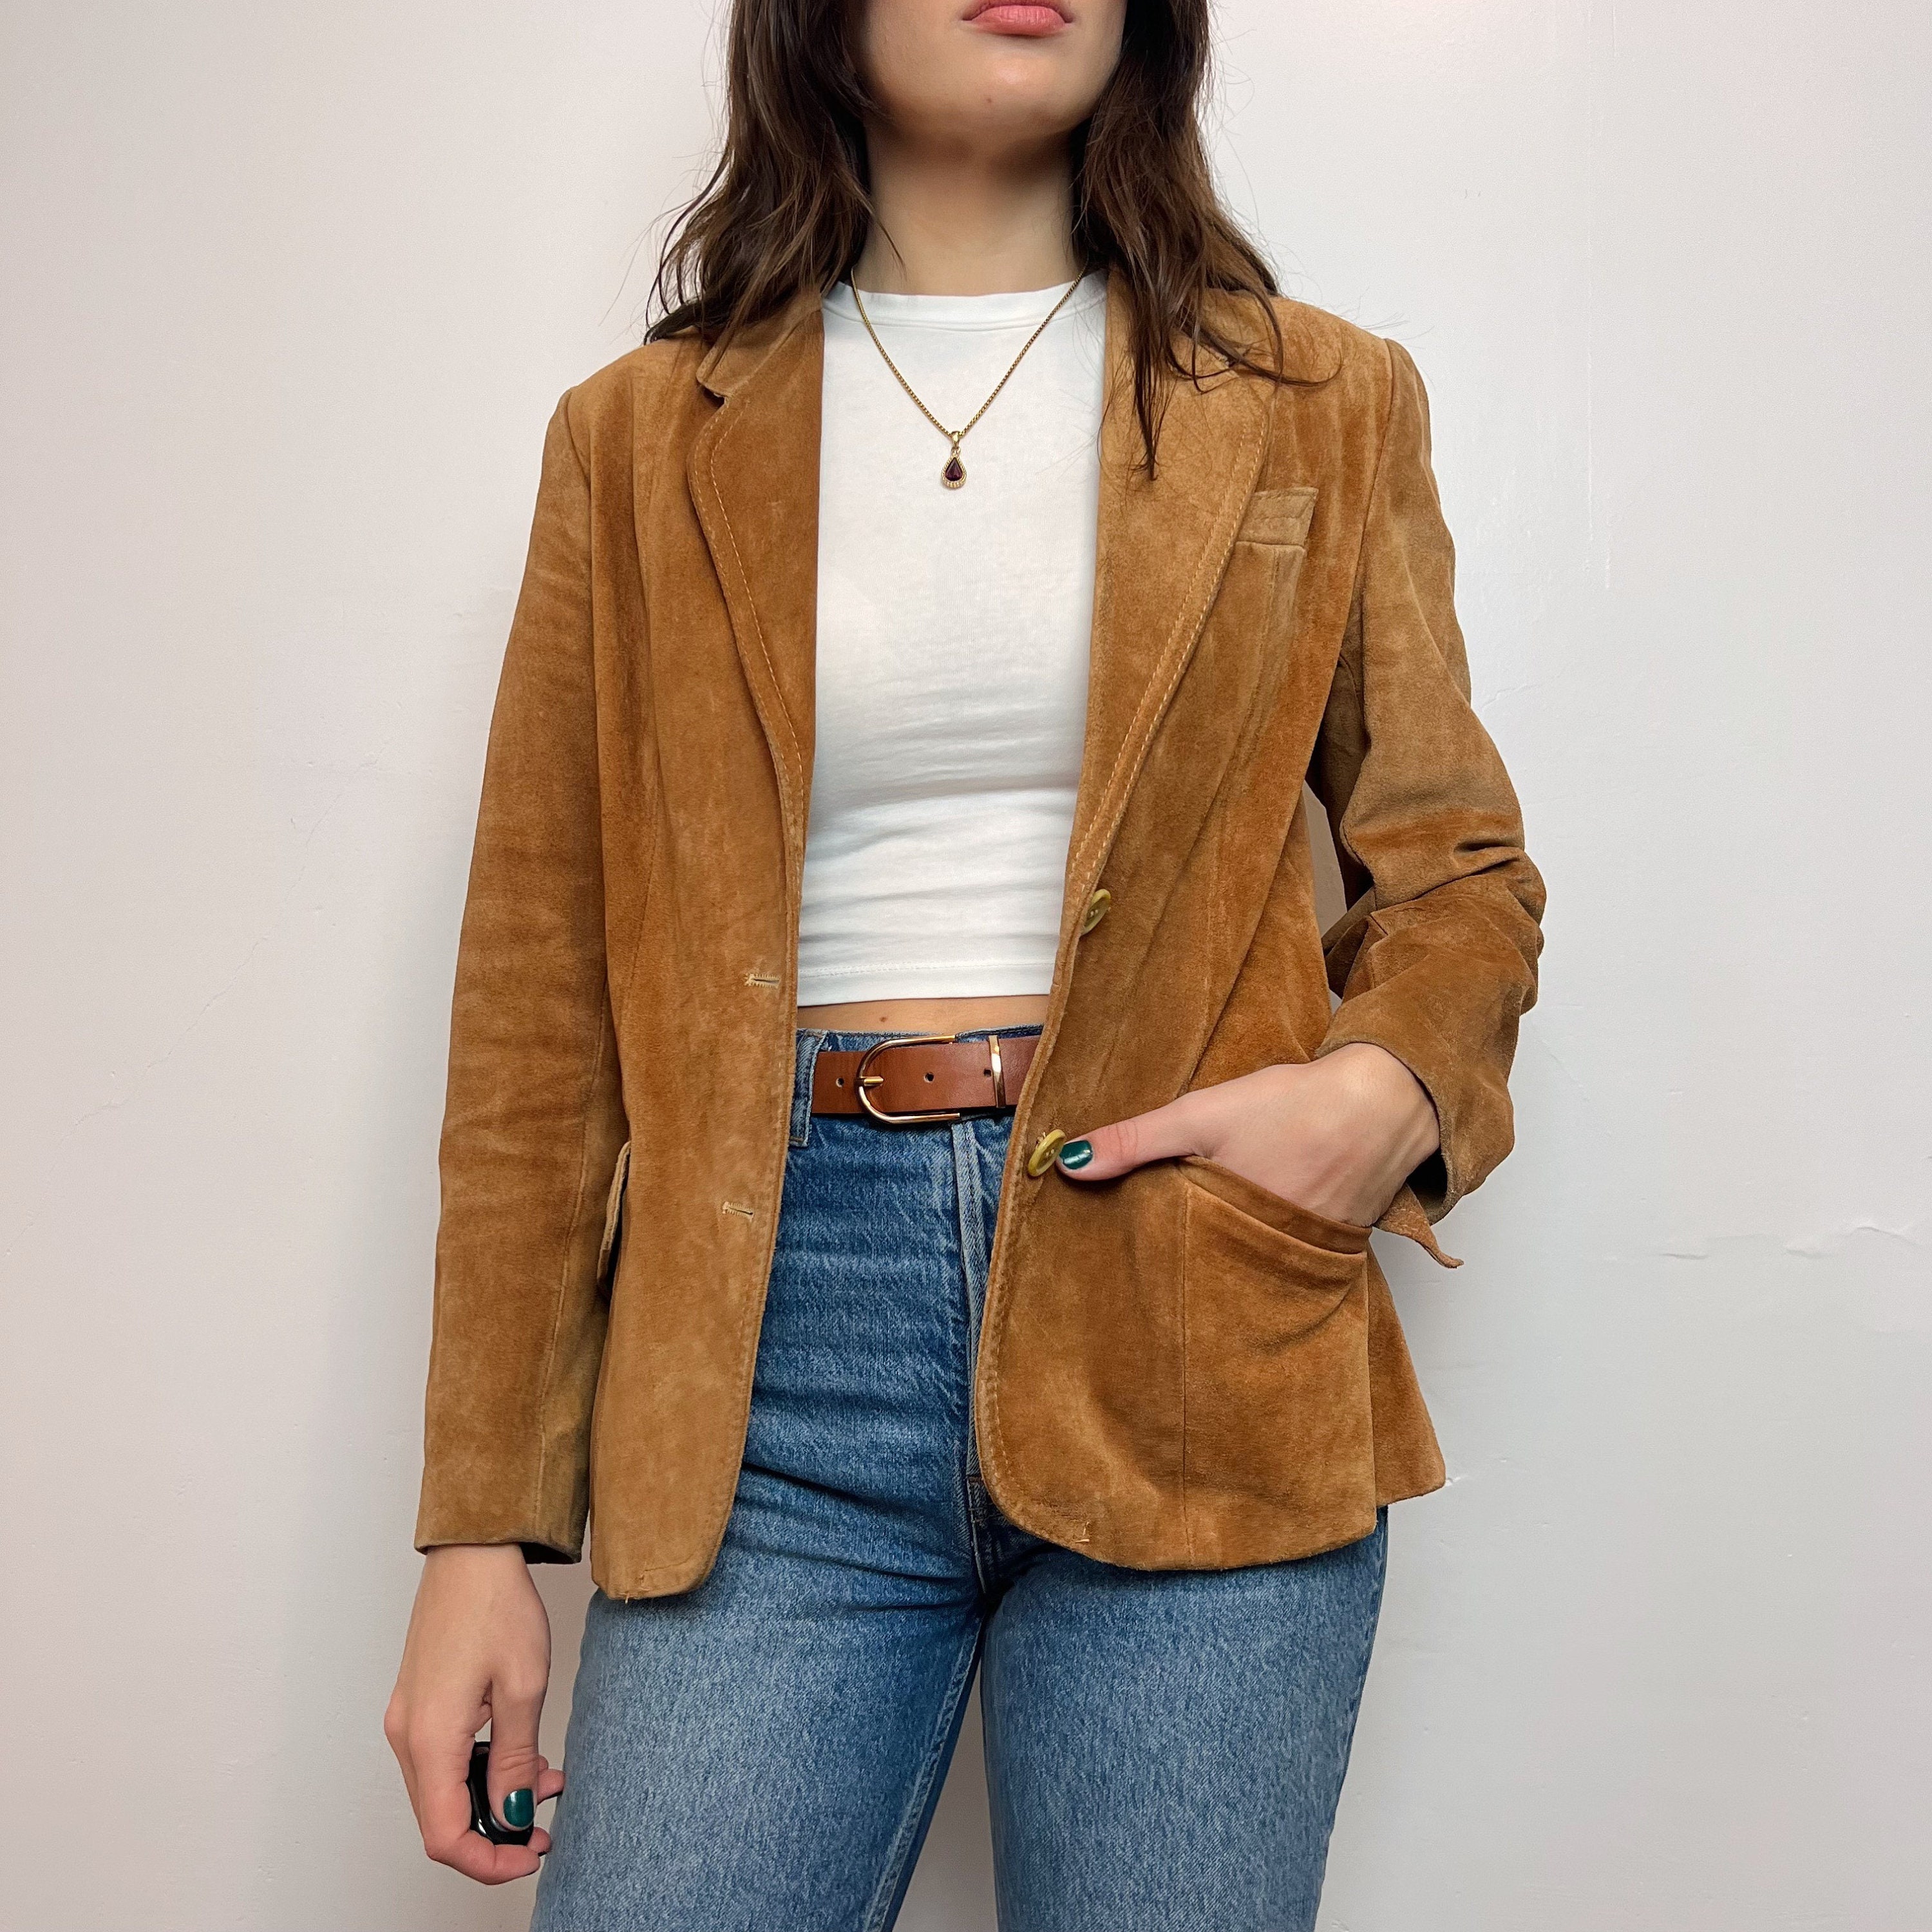 Buy Suede Leather Blazer Online in India - Etsy